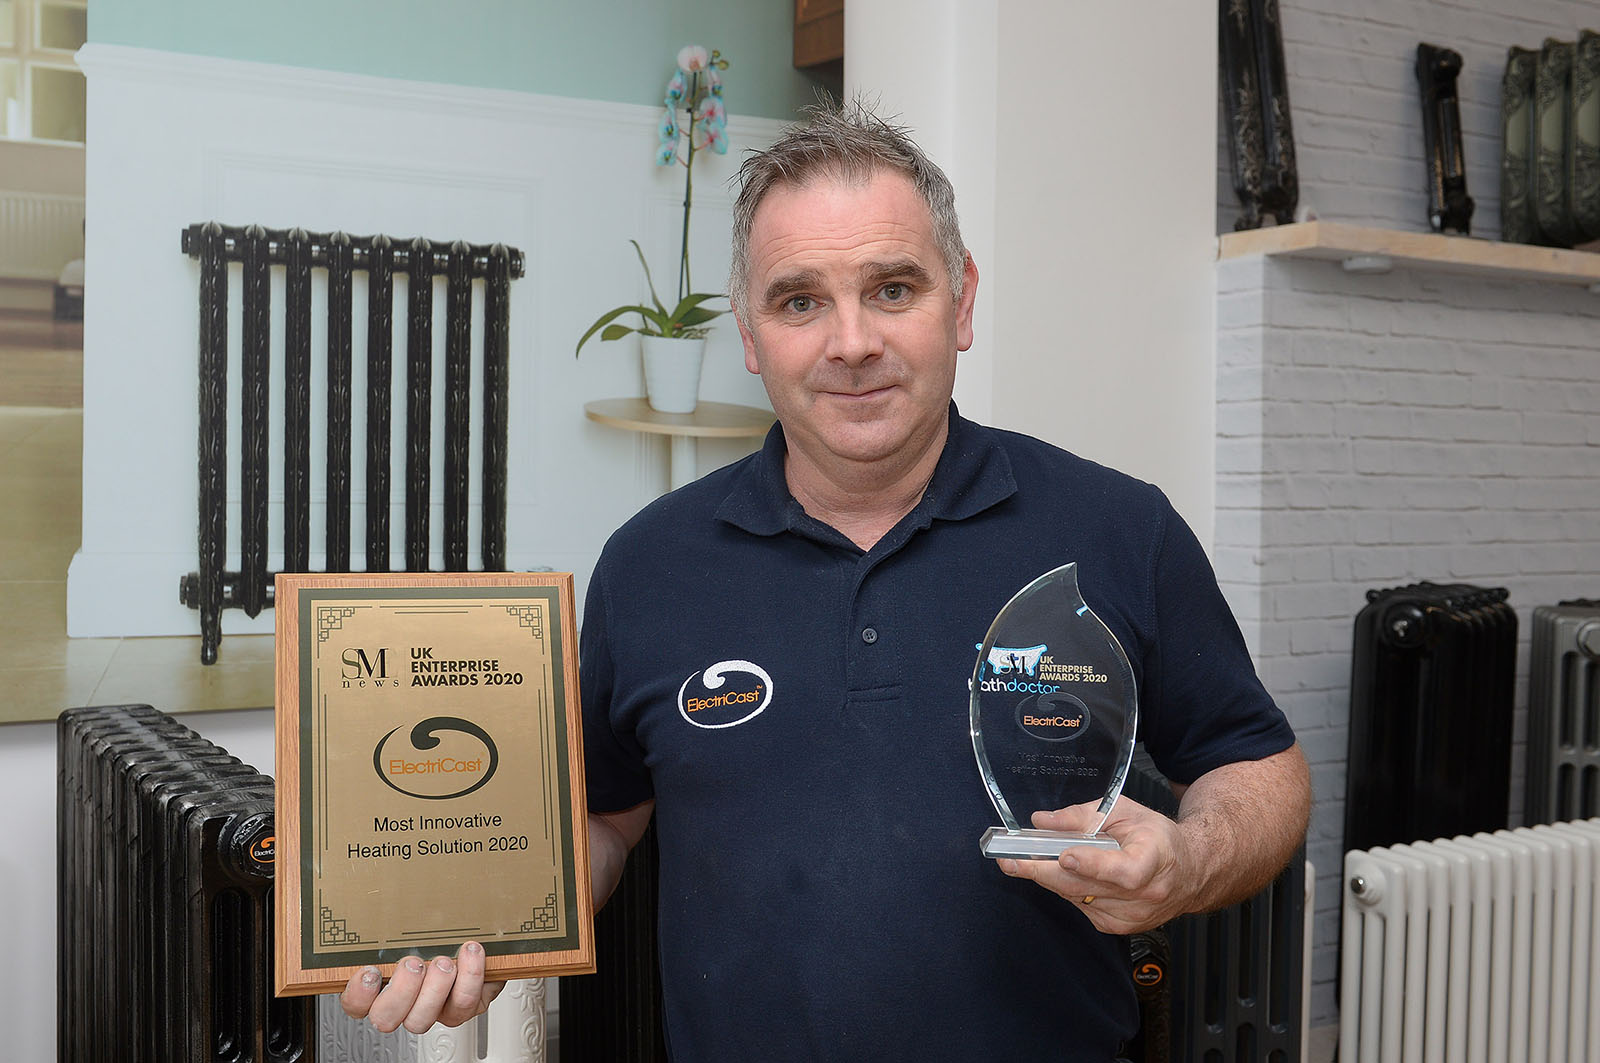 Local Business Profile: Shane McCrory, ElectriCast Ltd